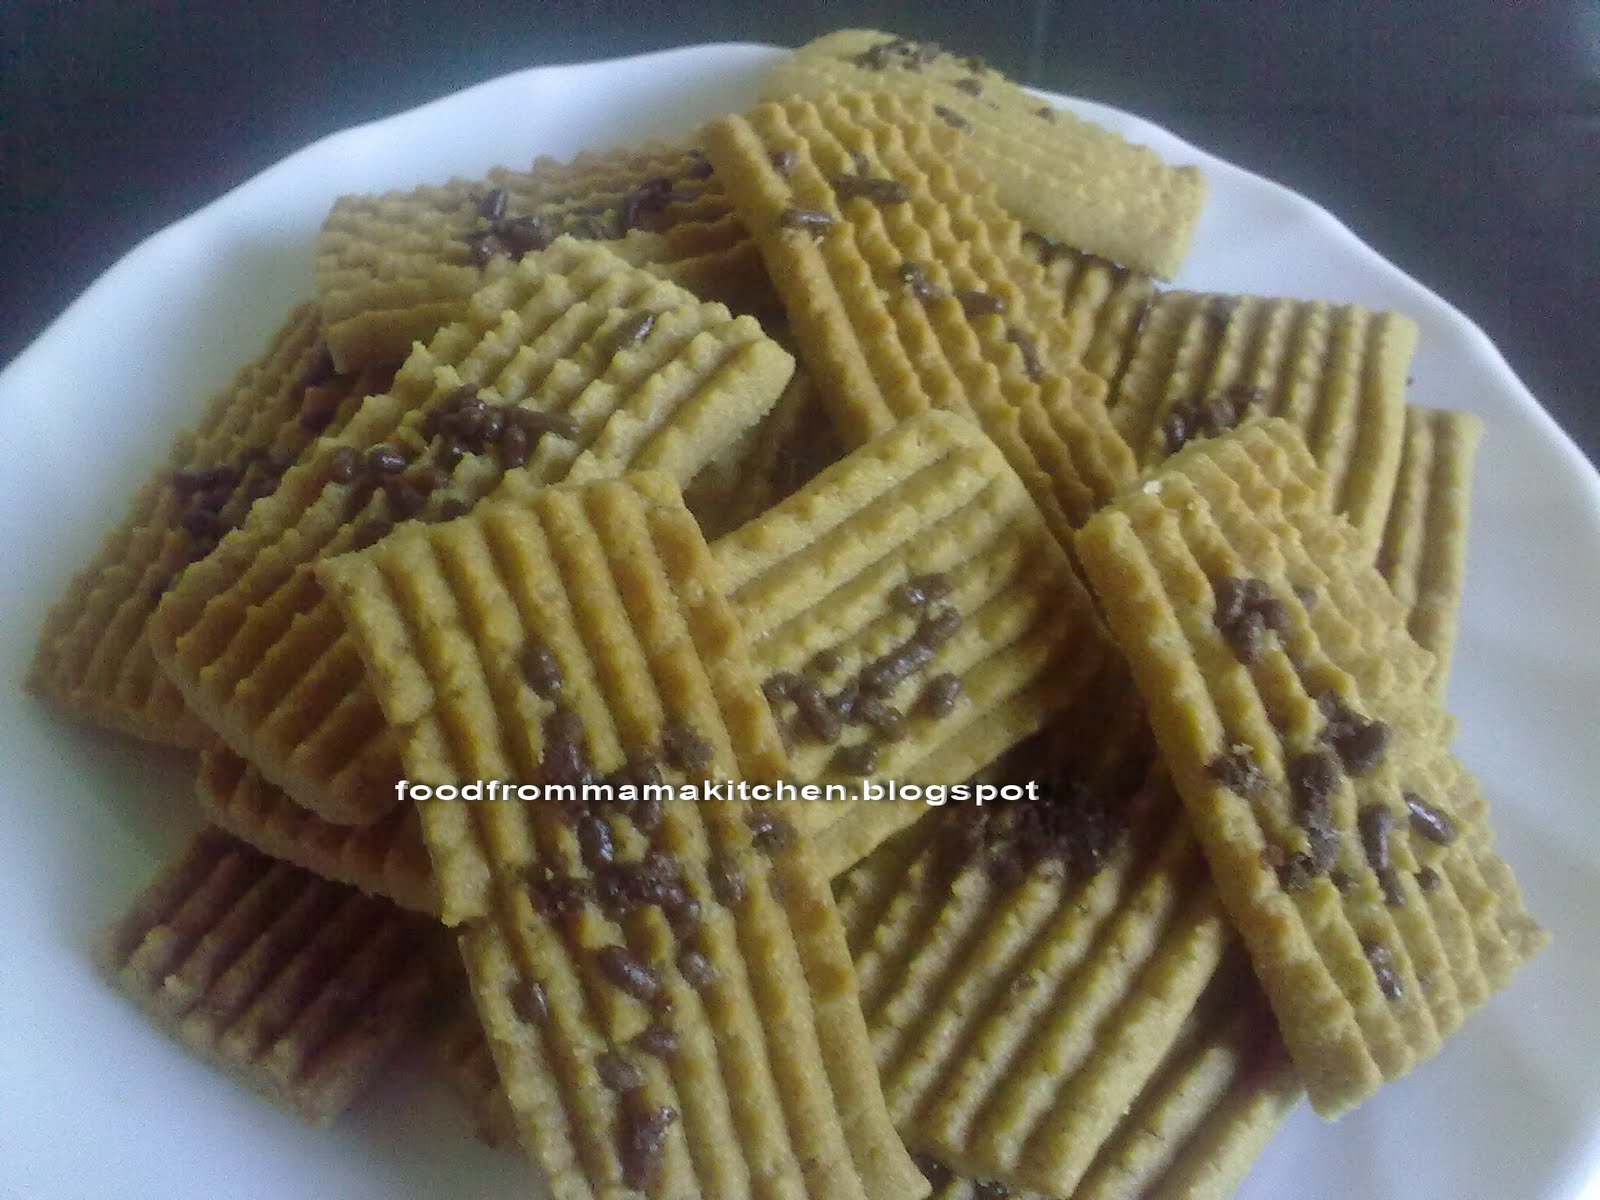 Food from Mama kitchen: Biskut Nescafe